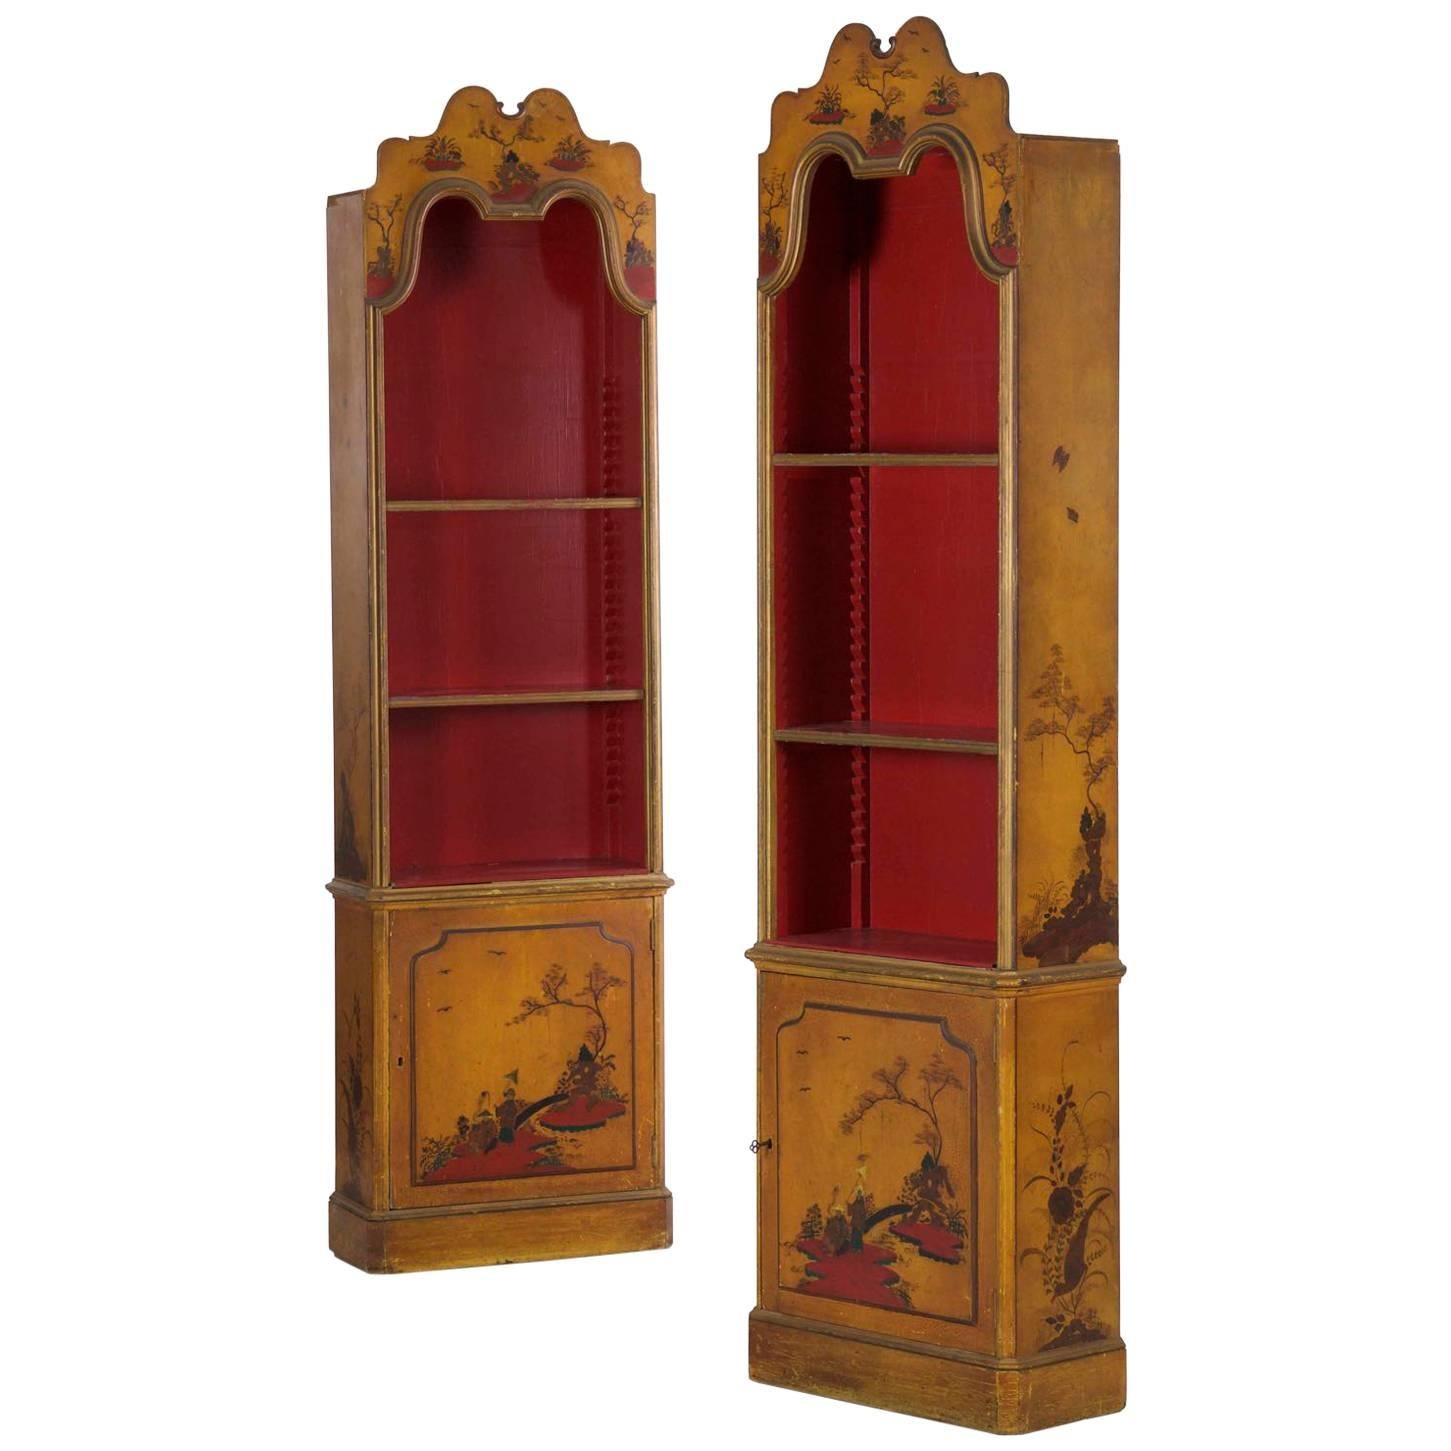 Pair of Venetian Style Japanned Bookcase Cabinets, circa 1920-1940